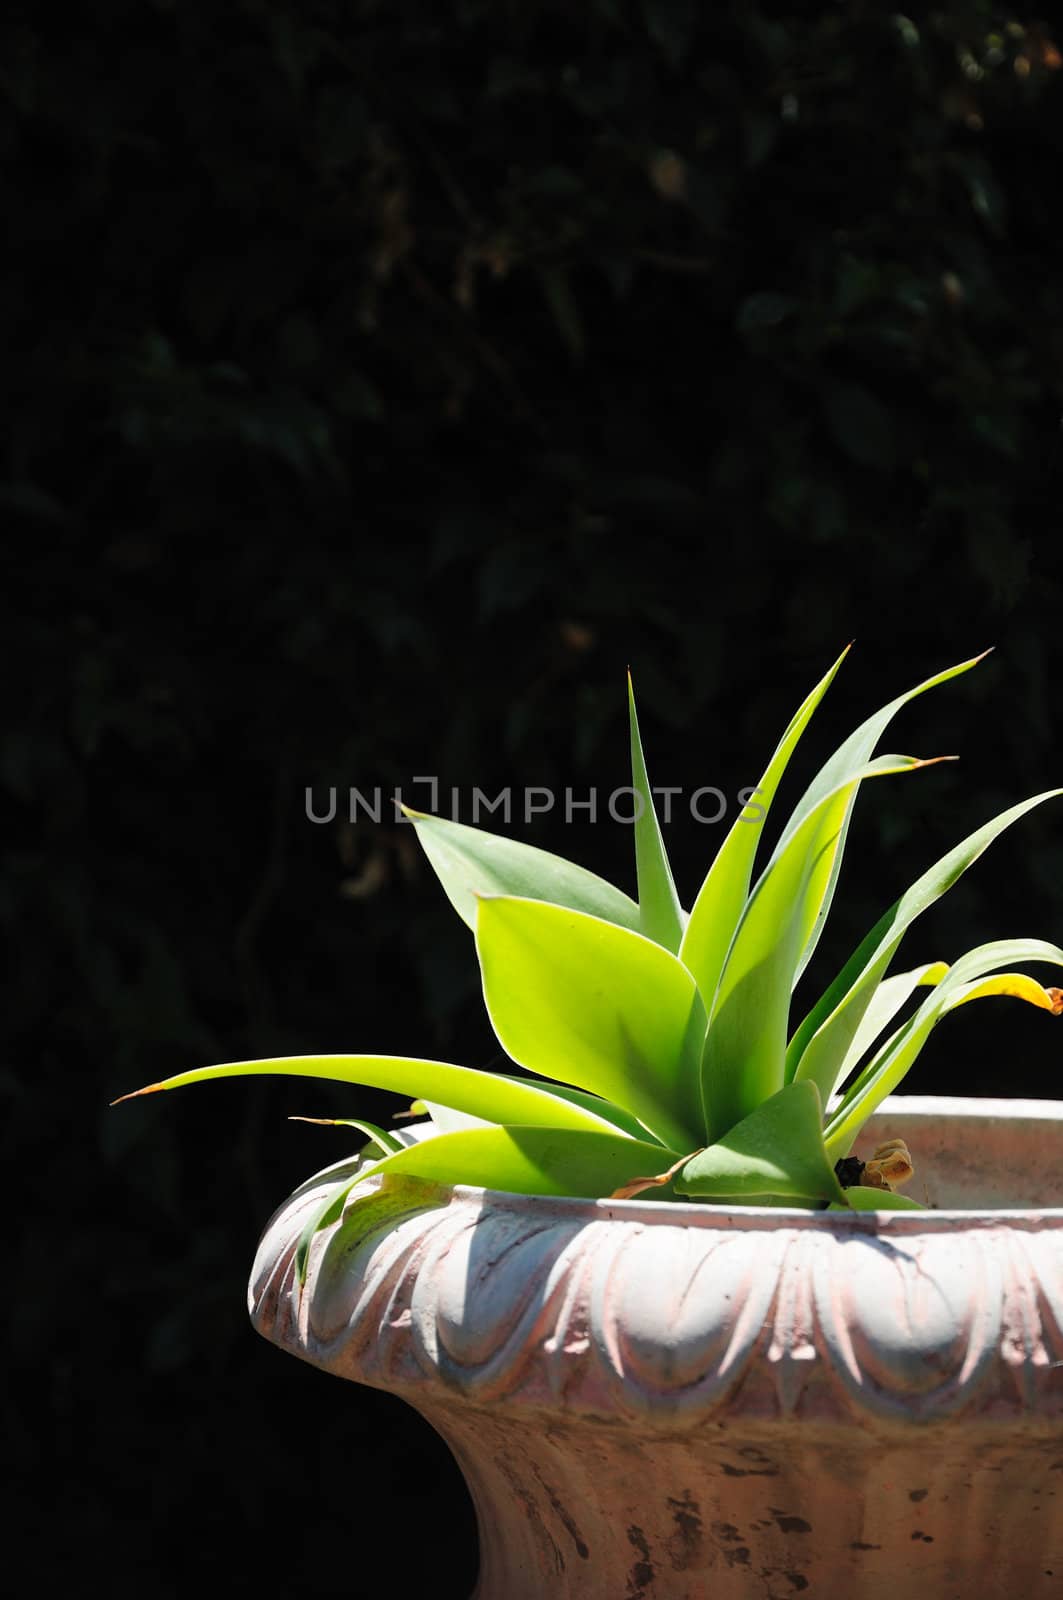 Agave succulent in planter reaching towards the sun, with a dark background.